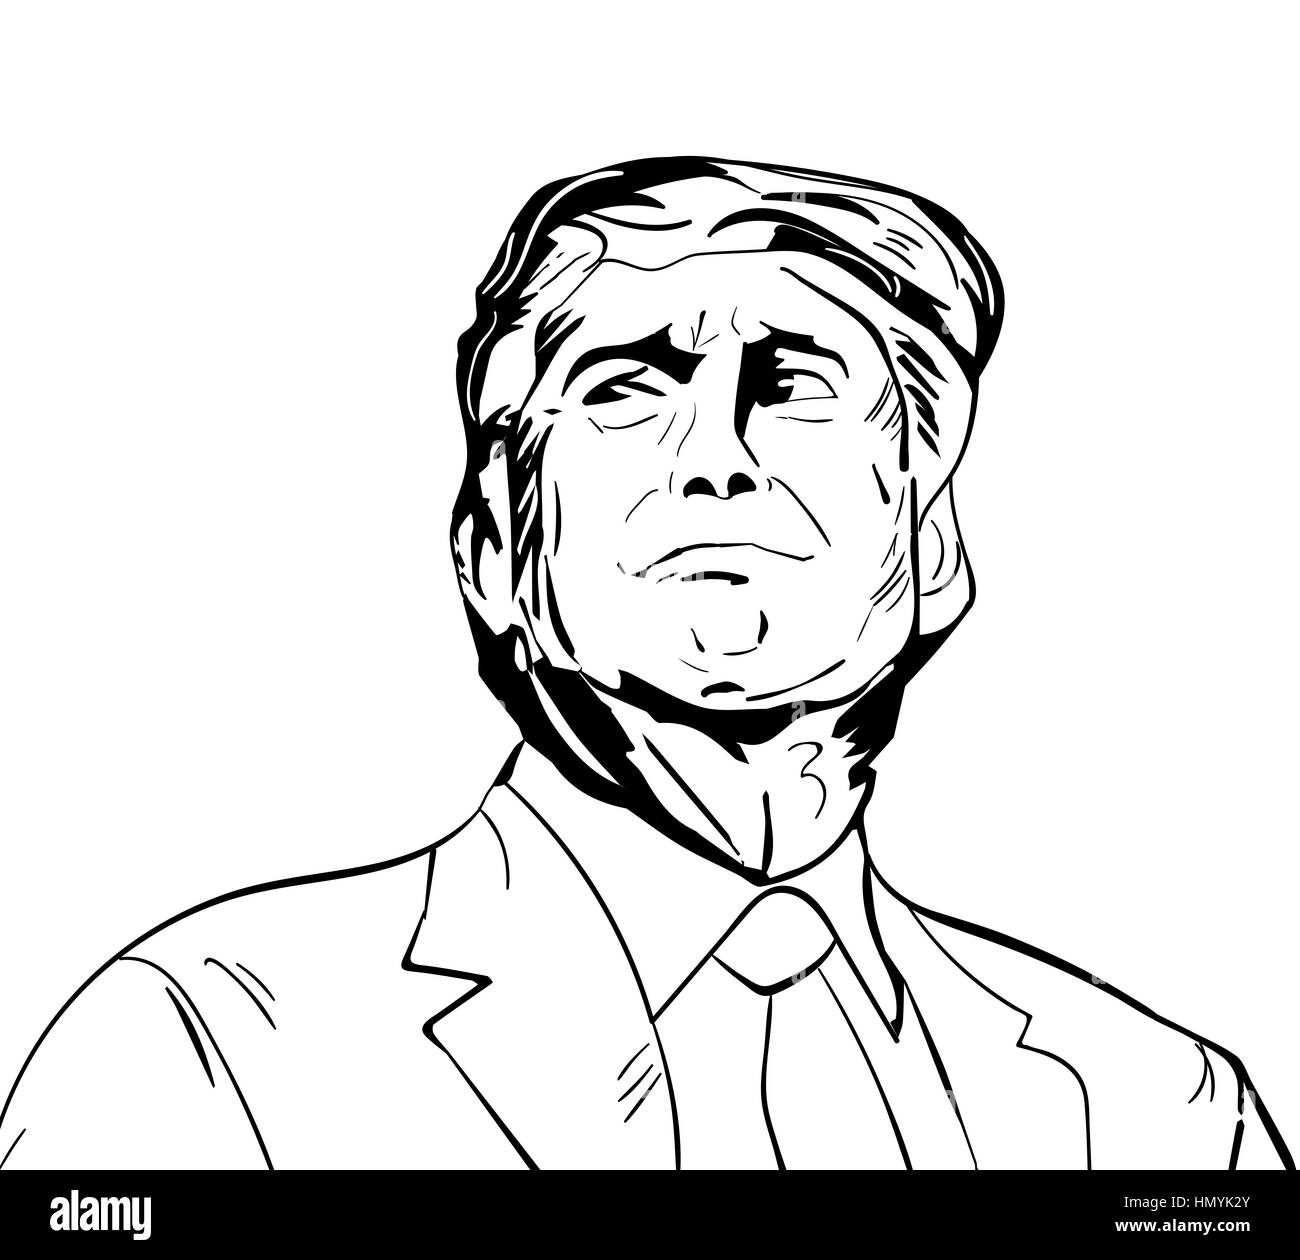 January 25, 2017: illustration of american president Donald Trump done in hand draw style Stock Photo